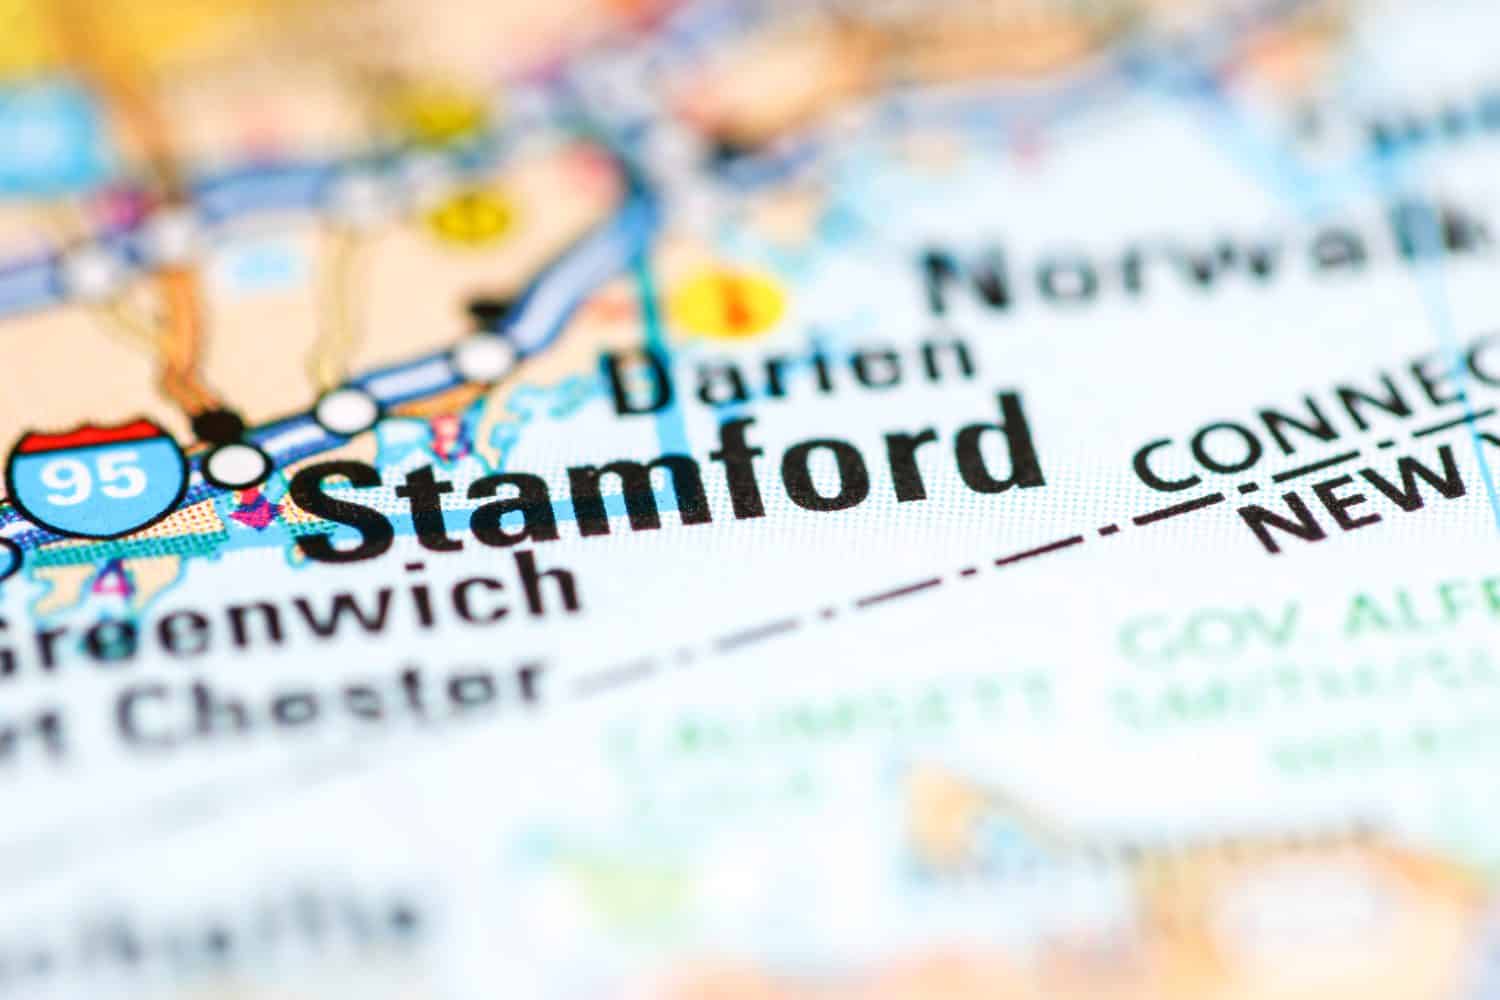 Stamford. Connecticut. USA on a geography map